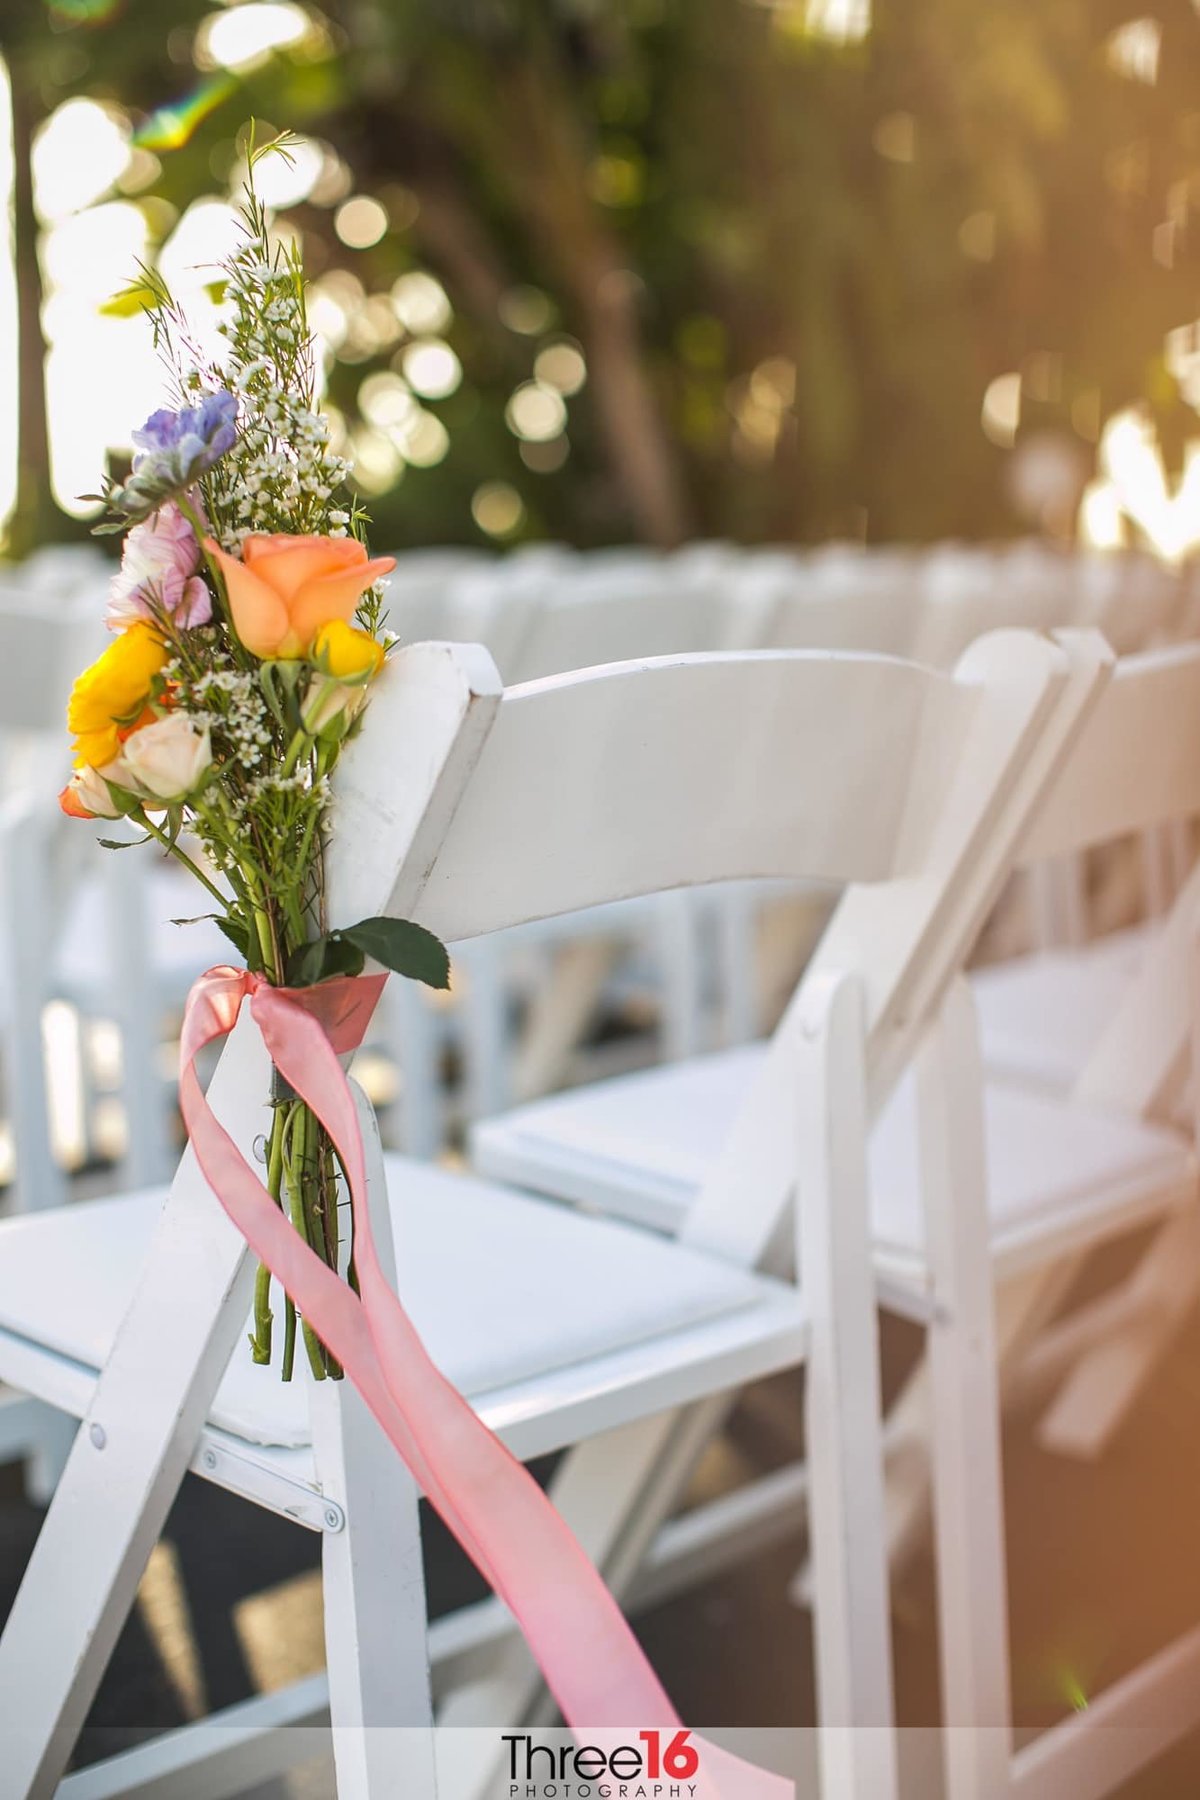 Flowers are attached to the end chair closest to the wedding aisle tied with pink ribbon